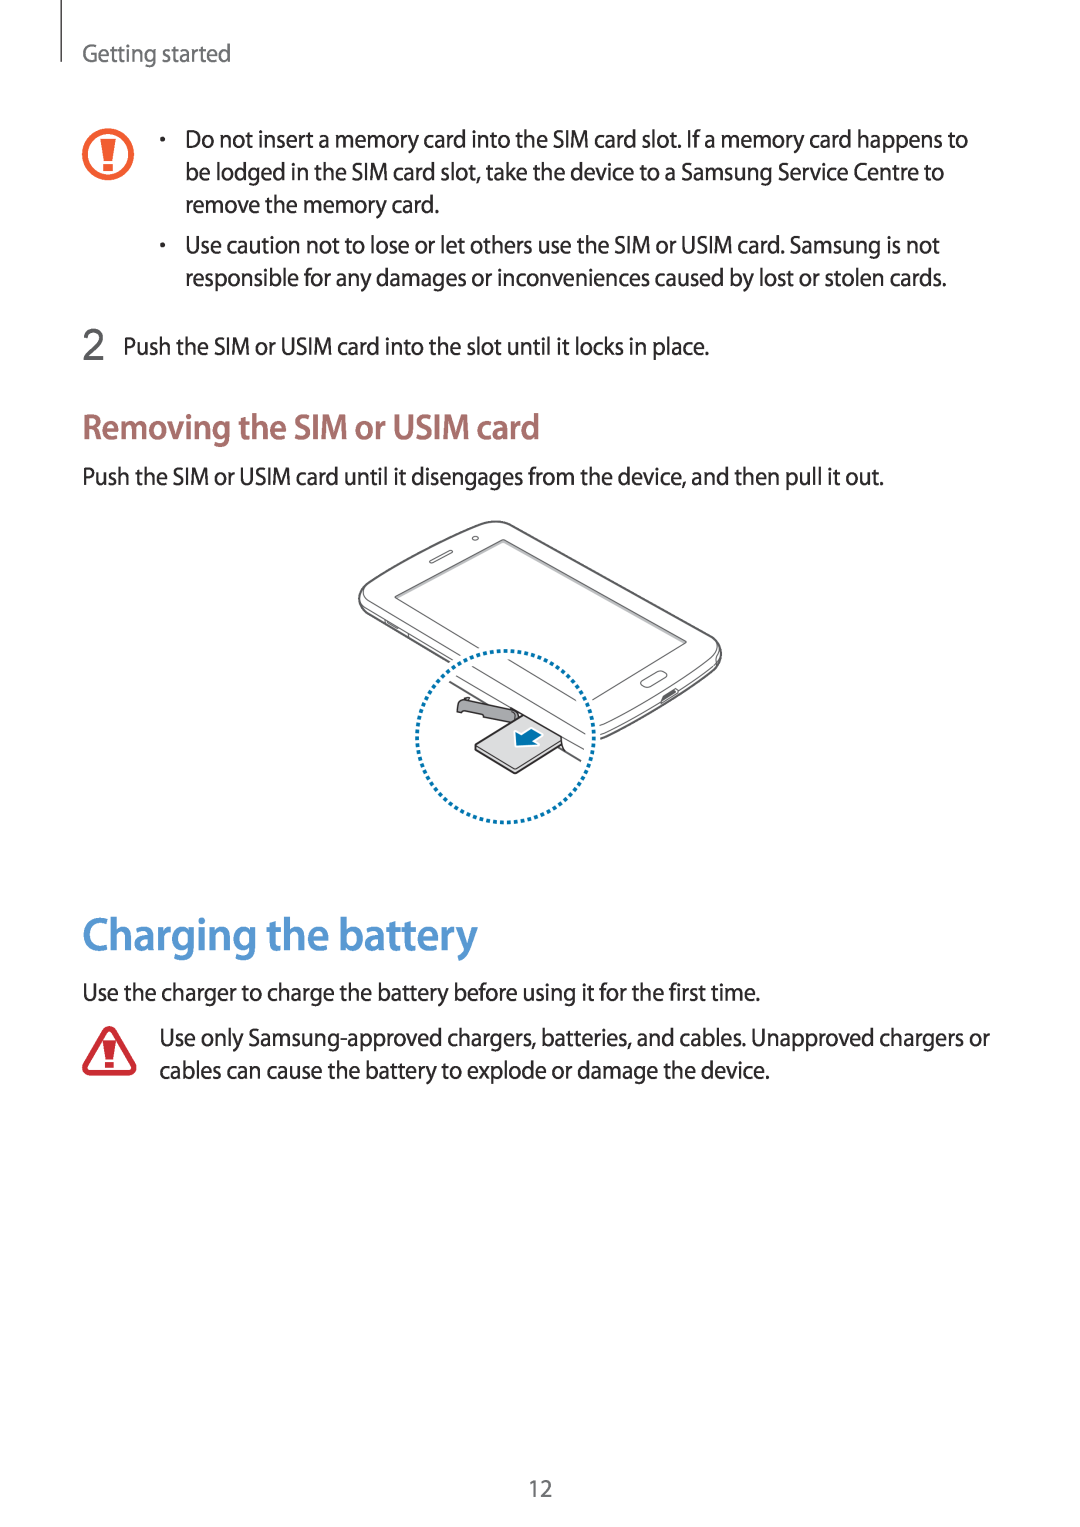 Samsung GT-N5100 user manual Charging the battery, Removing the SIM or USIM card, Getting started 